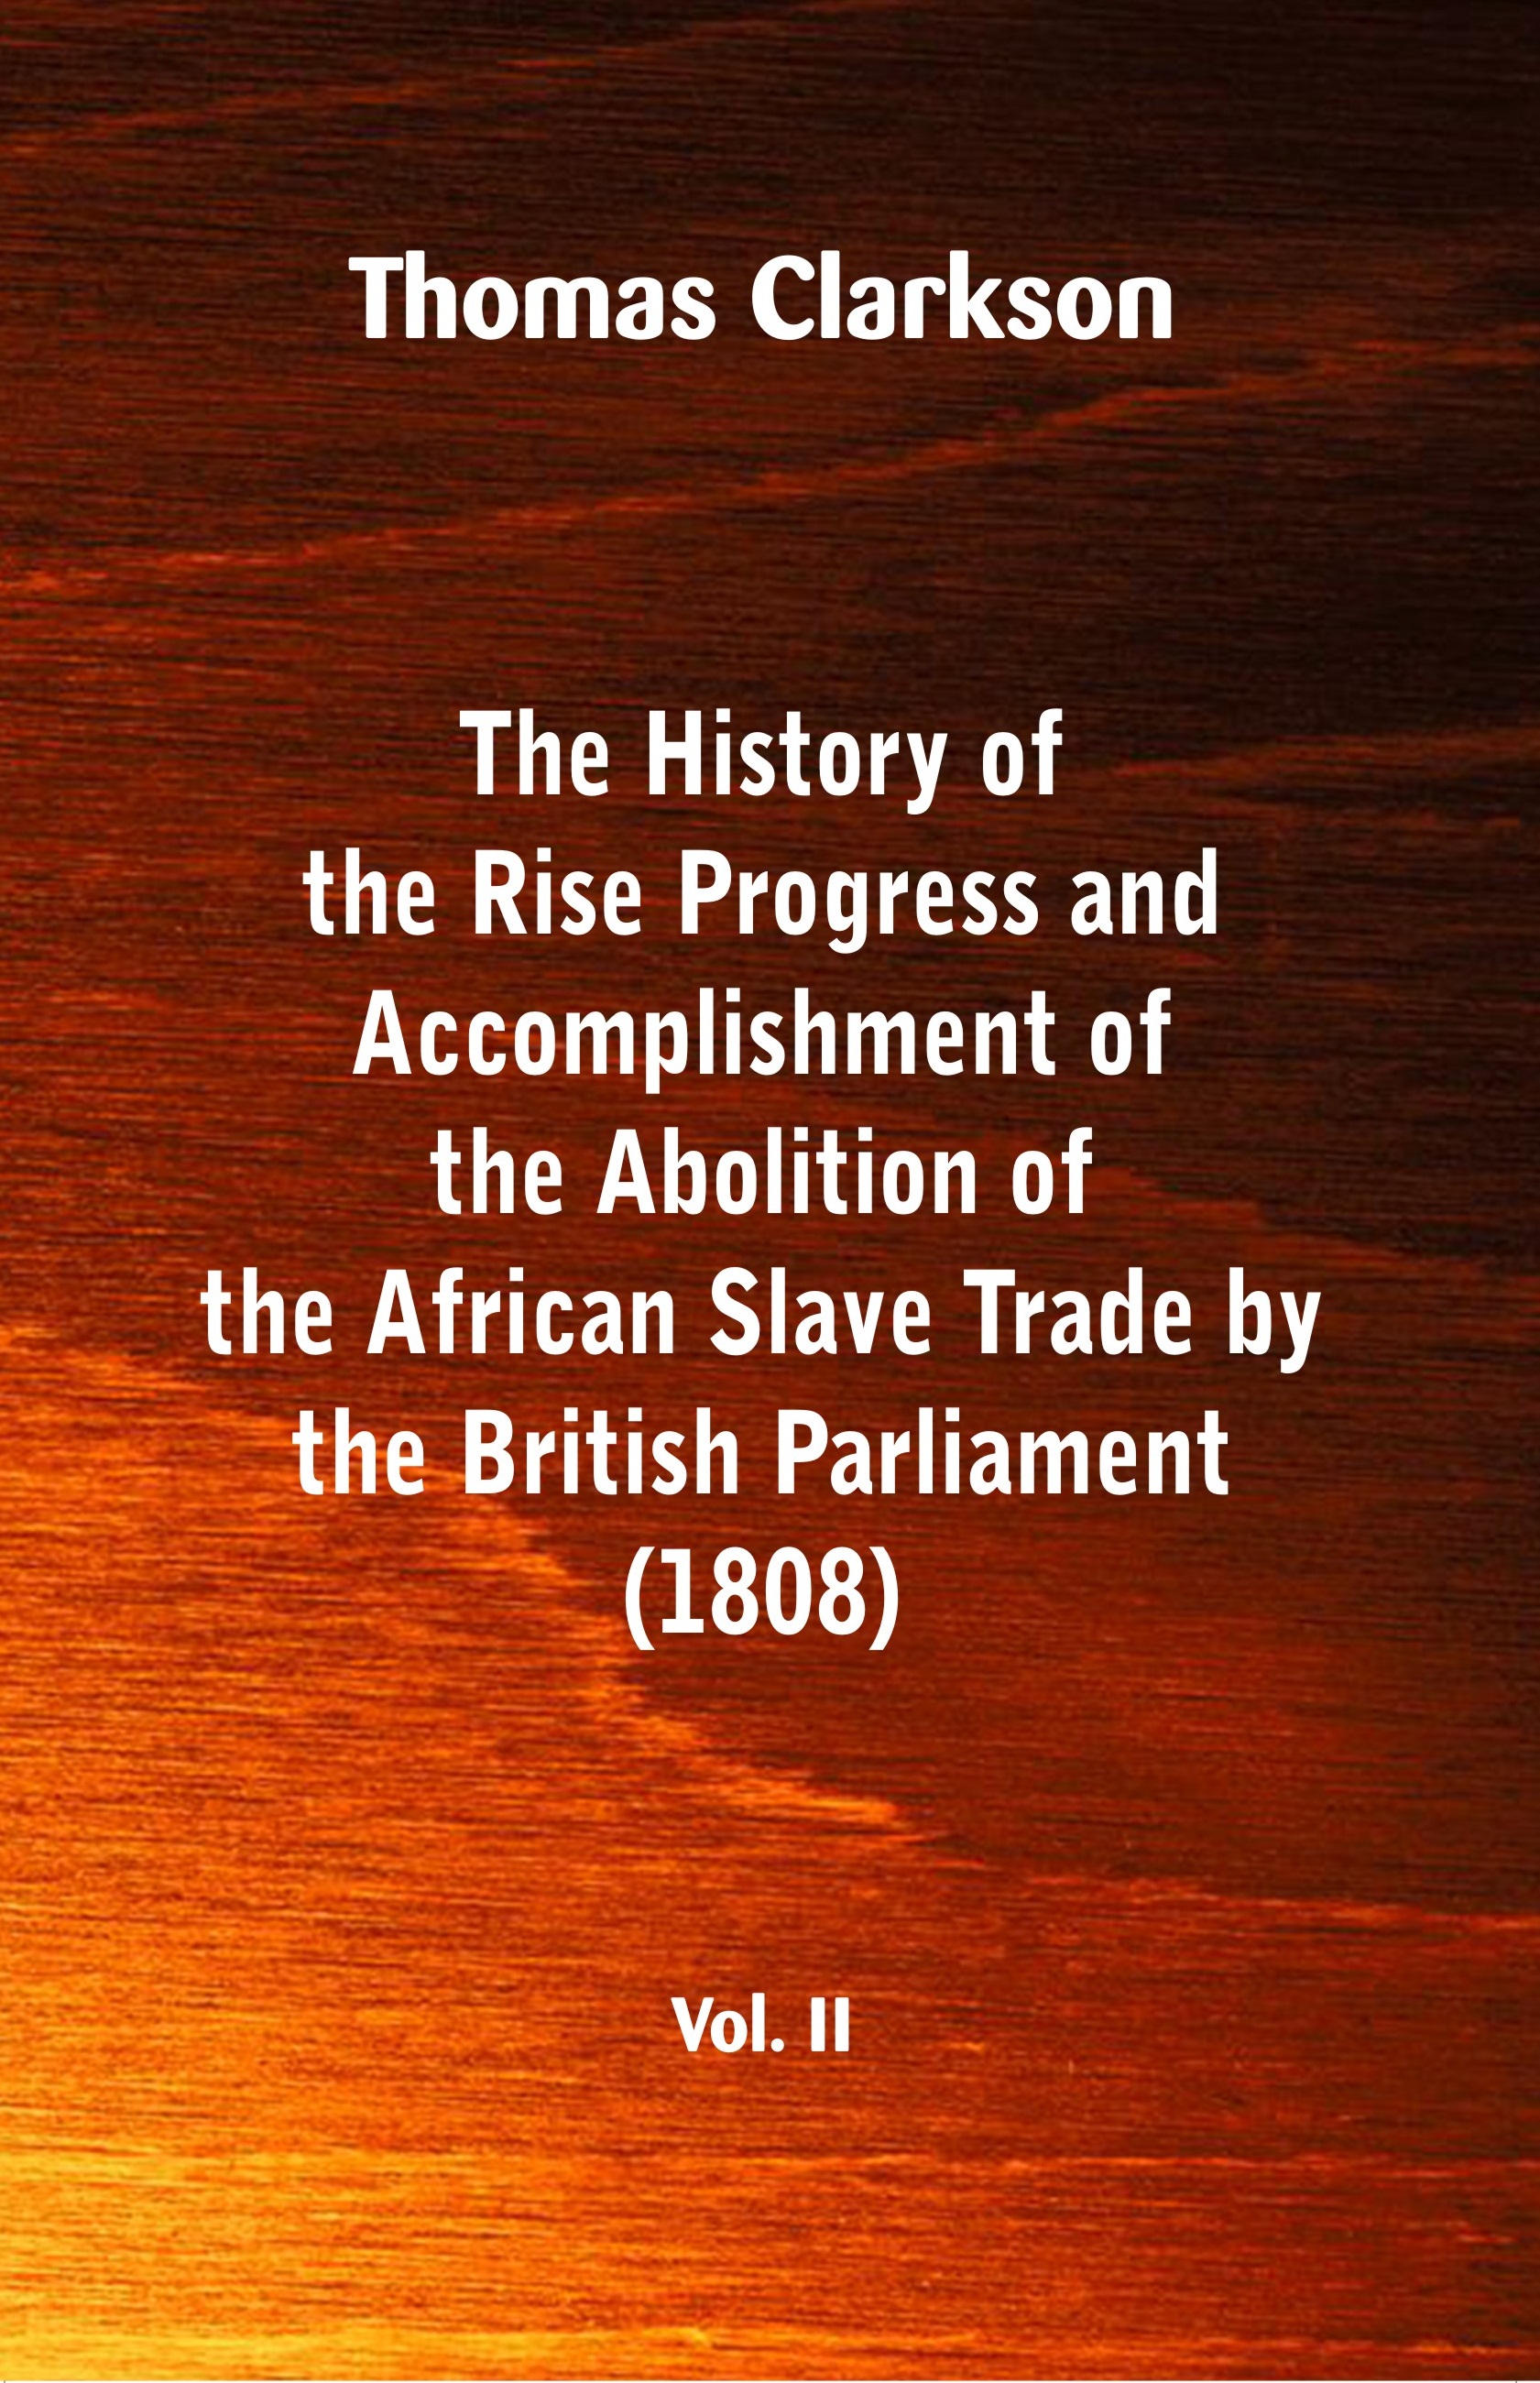 The History of the Rise, Progress and Accomplishment of the Abolition of the African Slave Trade by 